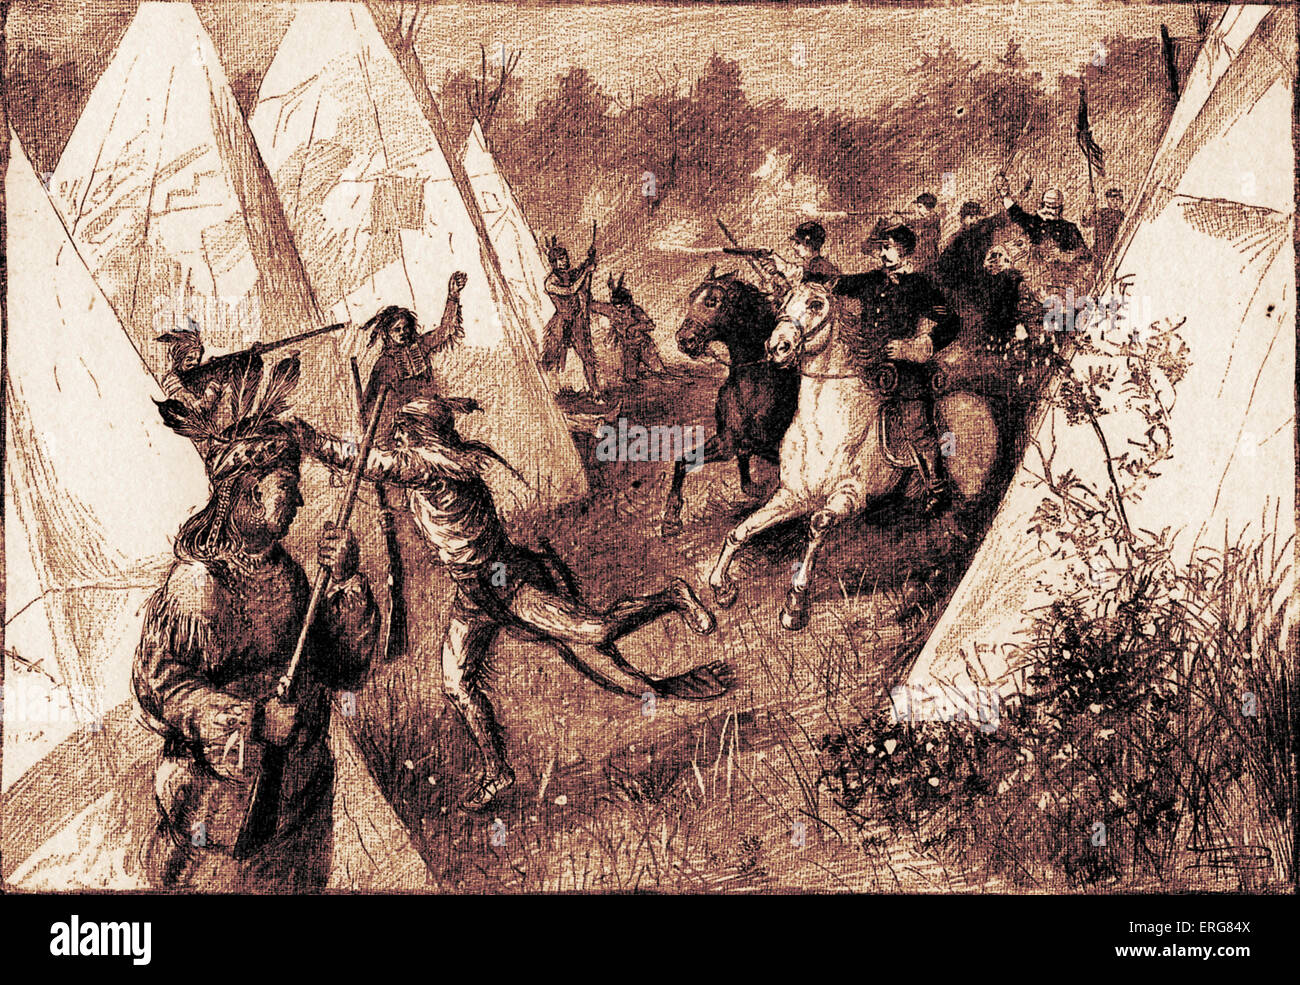 Colonists invading a Native American camp, published in 1887. The caption reads 'Charging an Indian camp'. Stock Photo